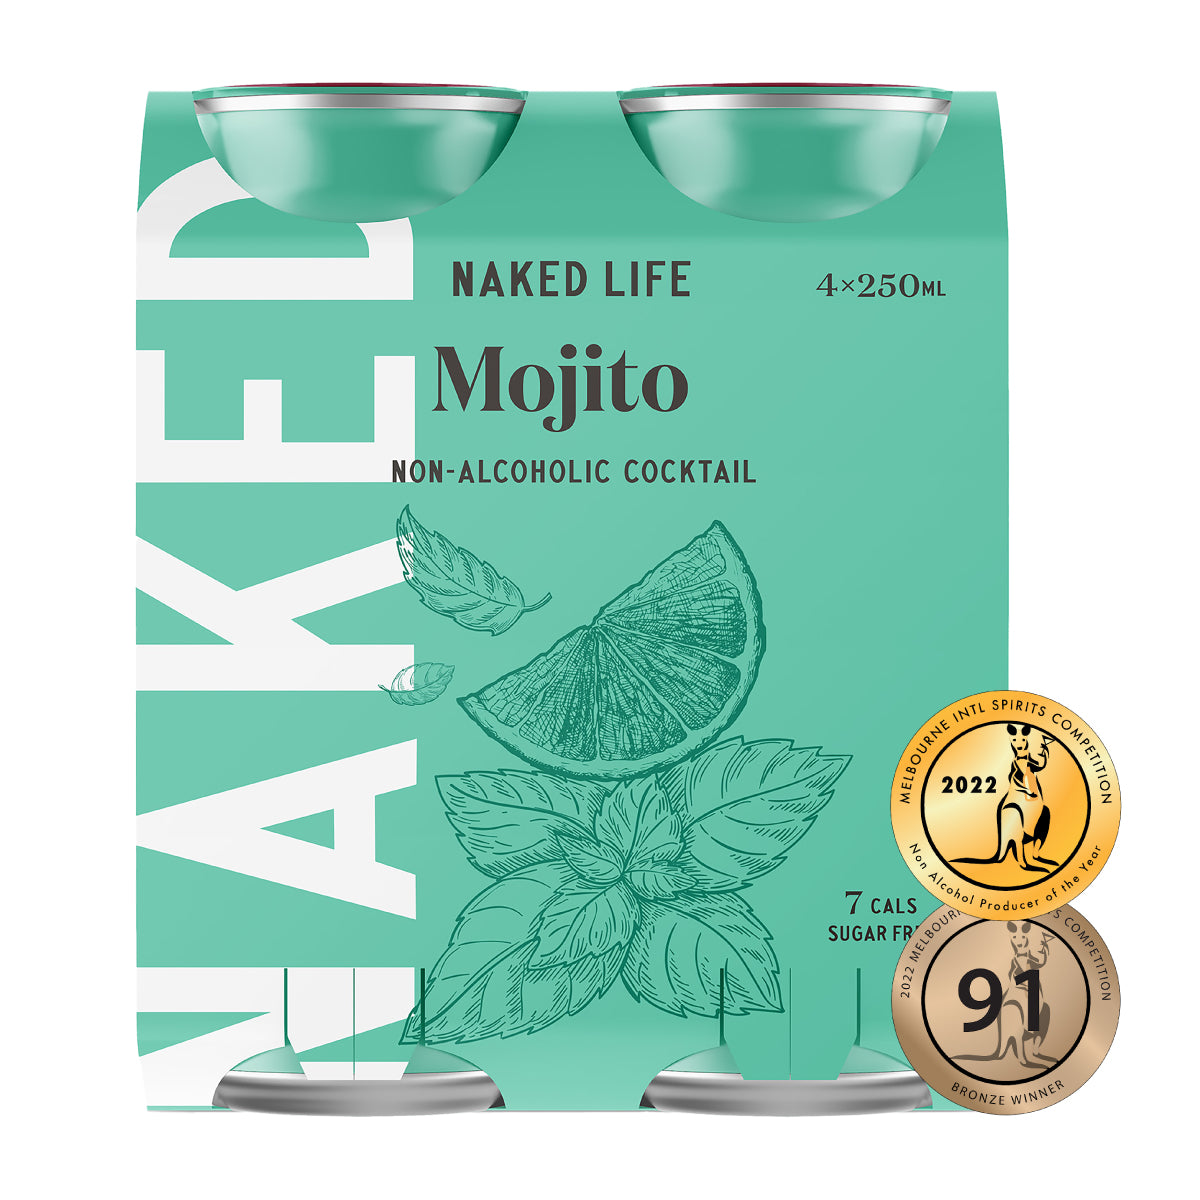 Naked Life Non-Alcoholic Cocktail Mojito - 4 Pack x 250ml Cans